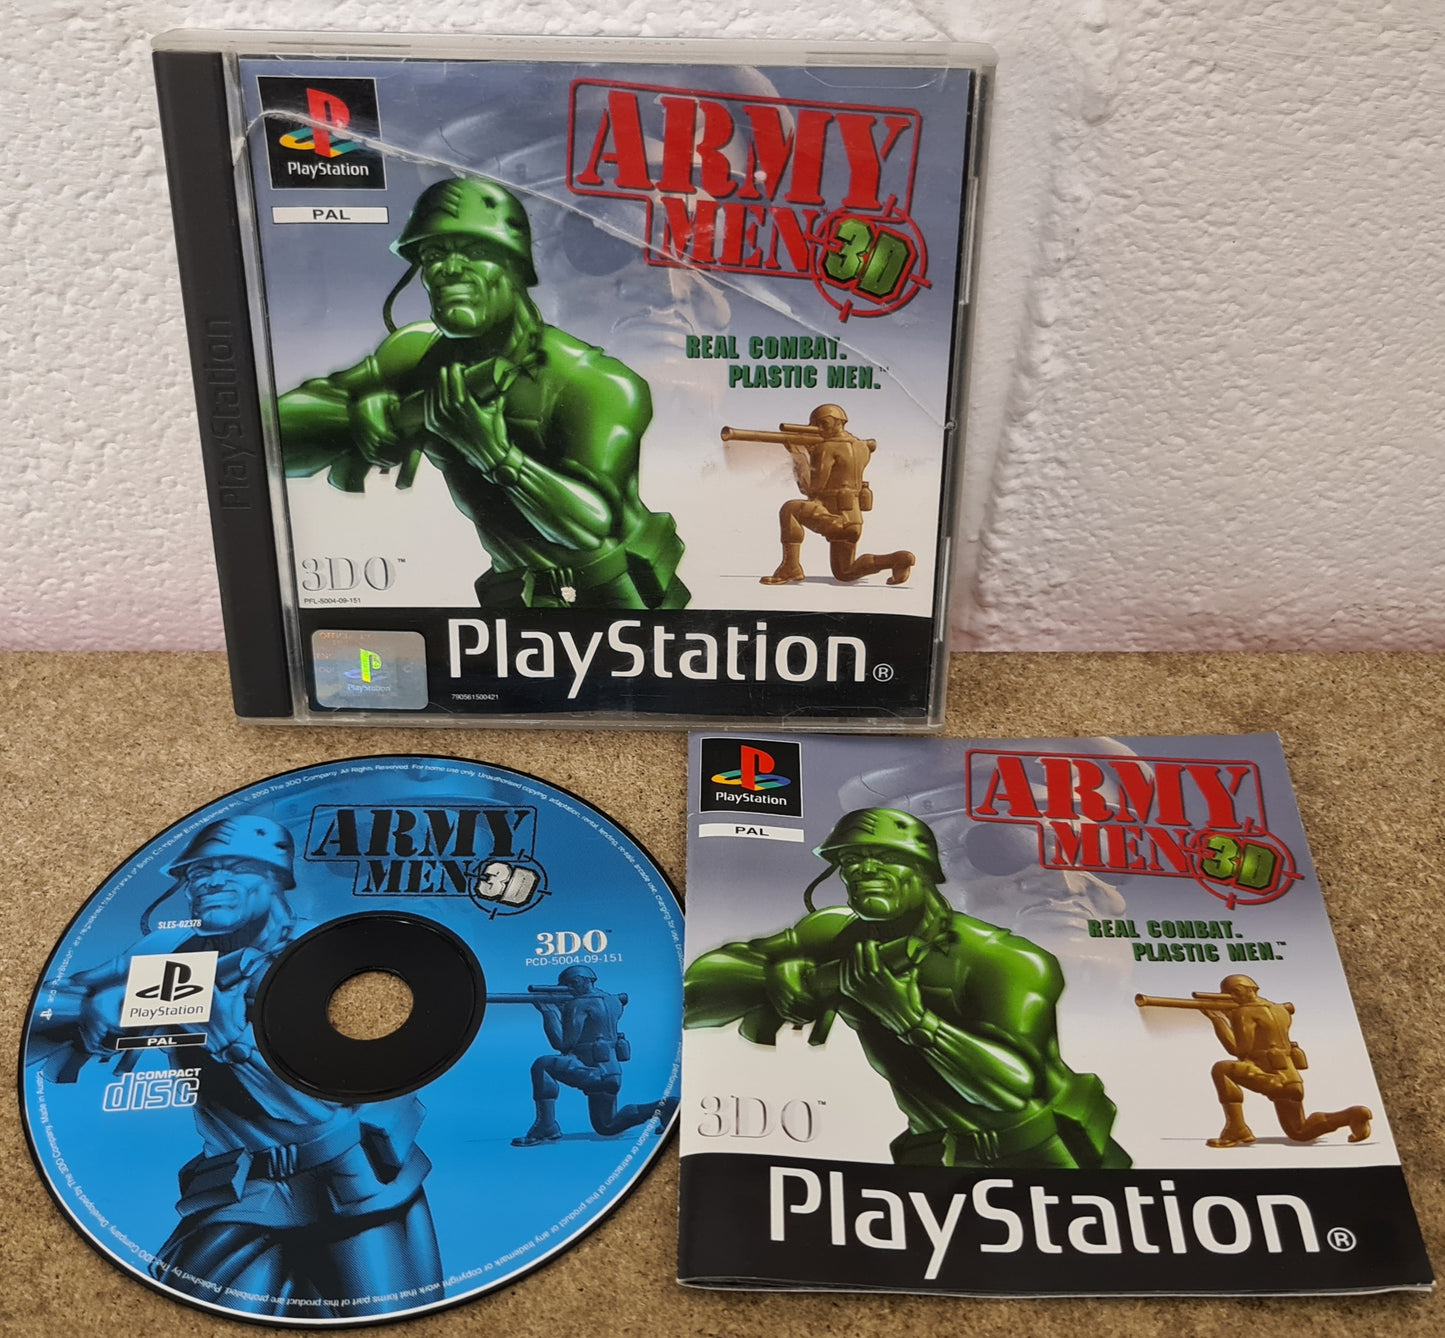 Army Men 3D Sony Playstation 1 (PS1) Game